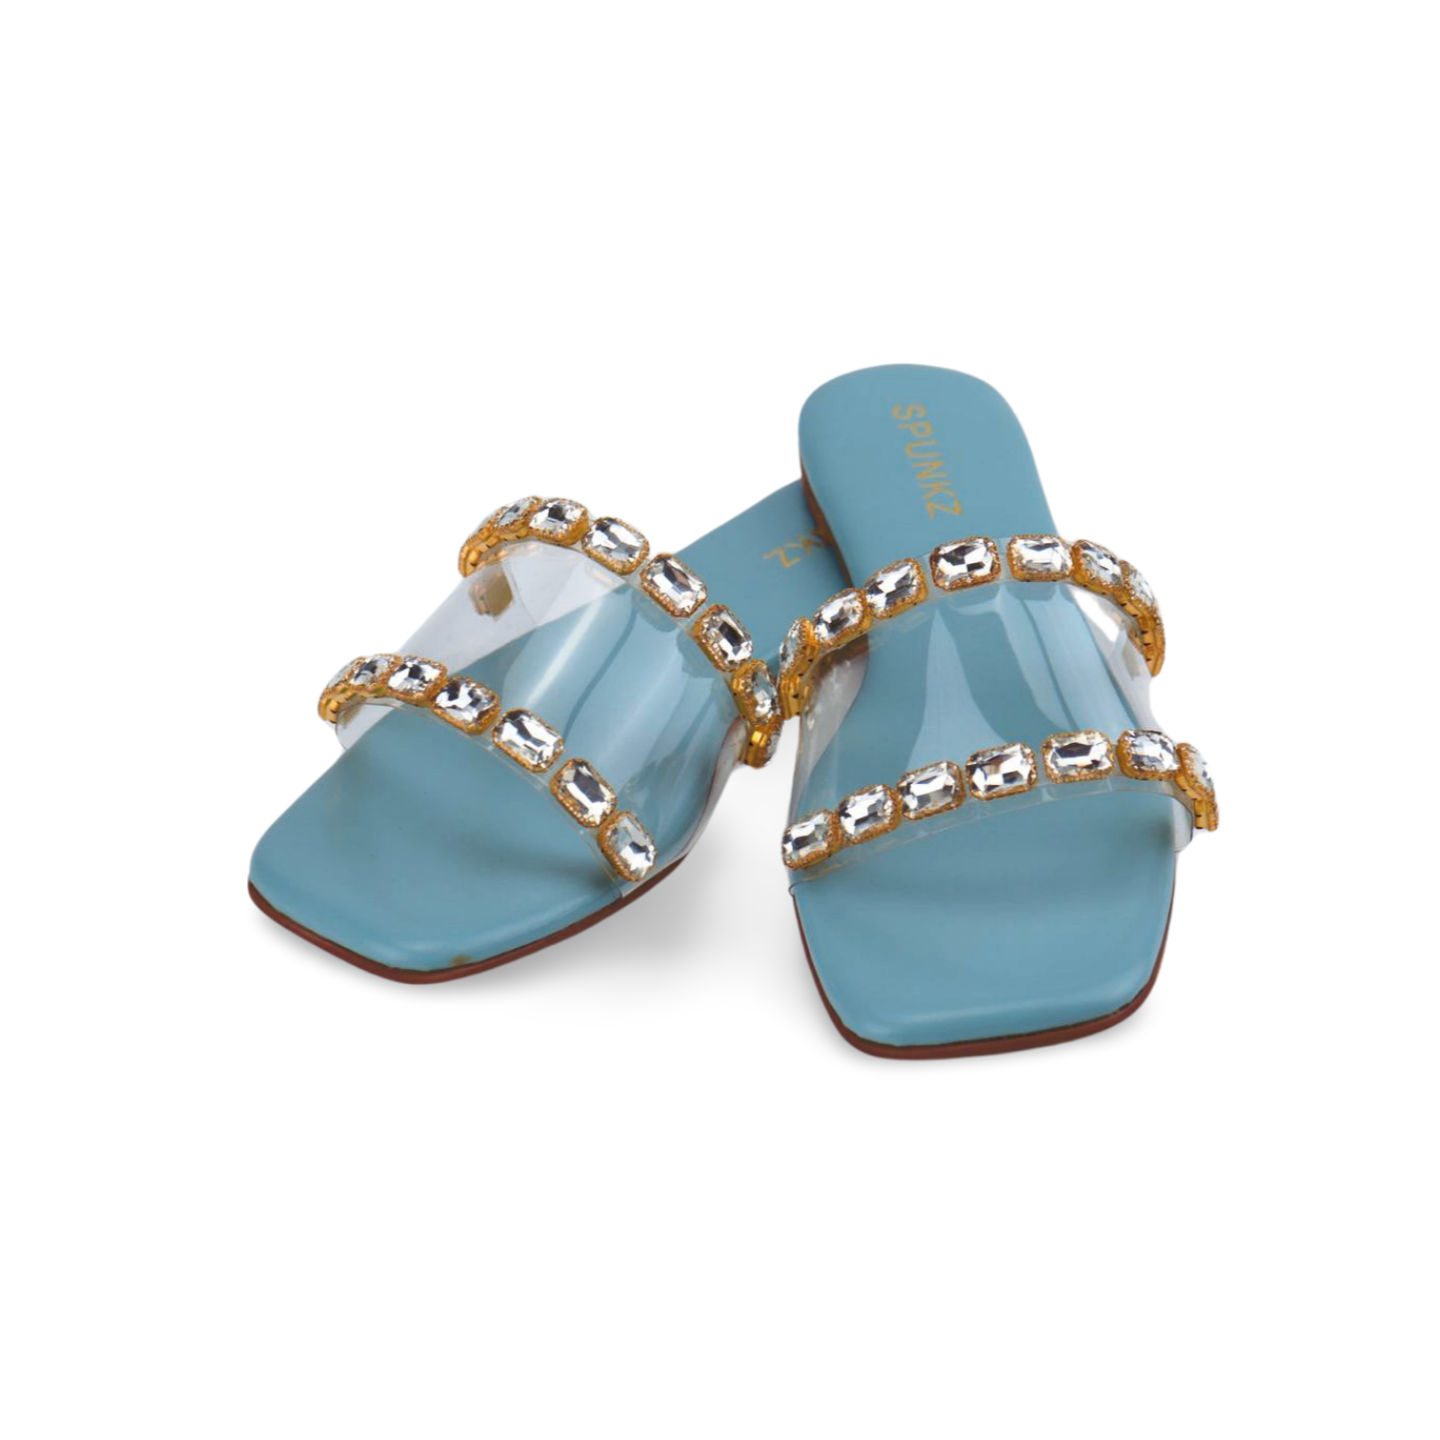 Women's Dress Sandals with Clear Heels and Rhinestone Embellishments